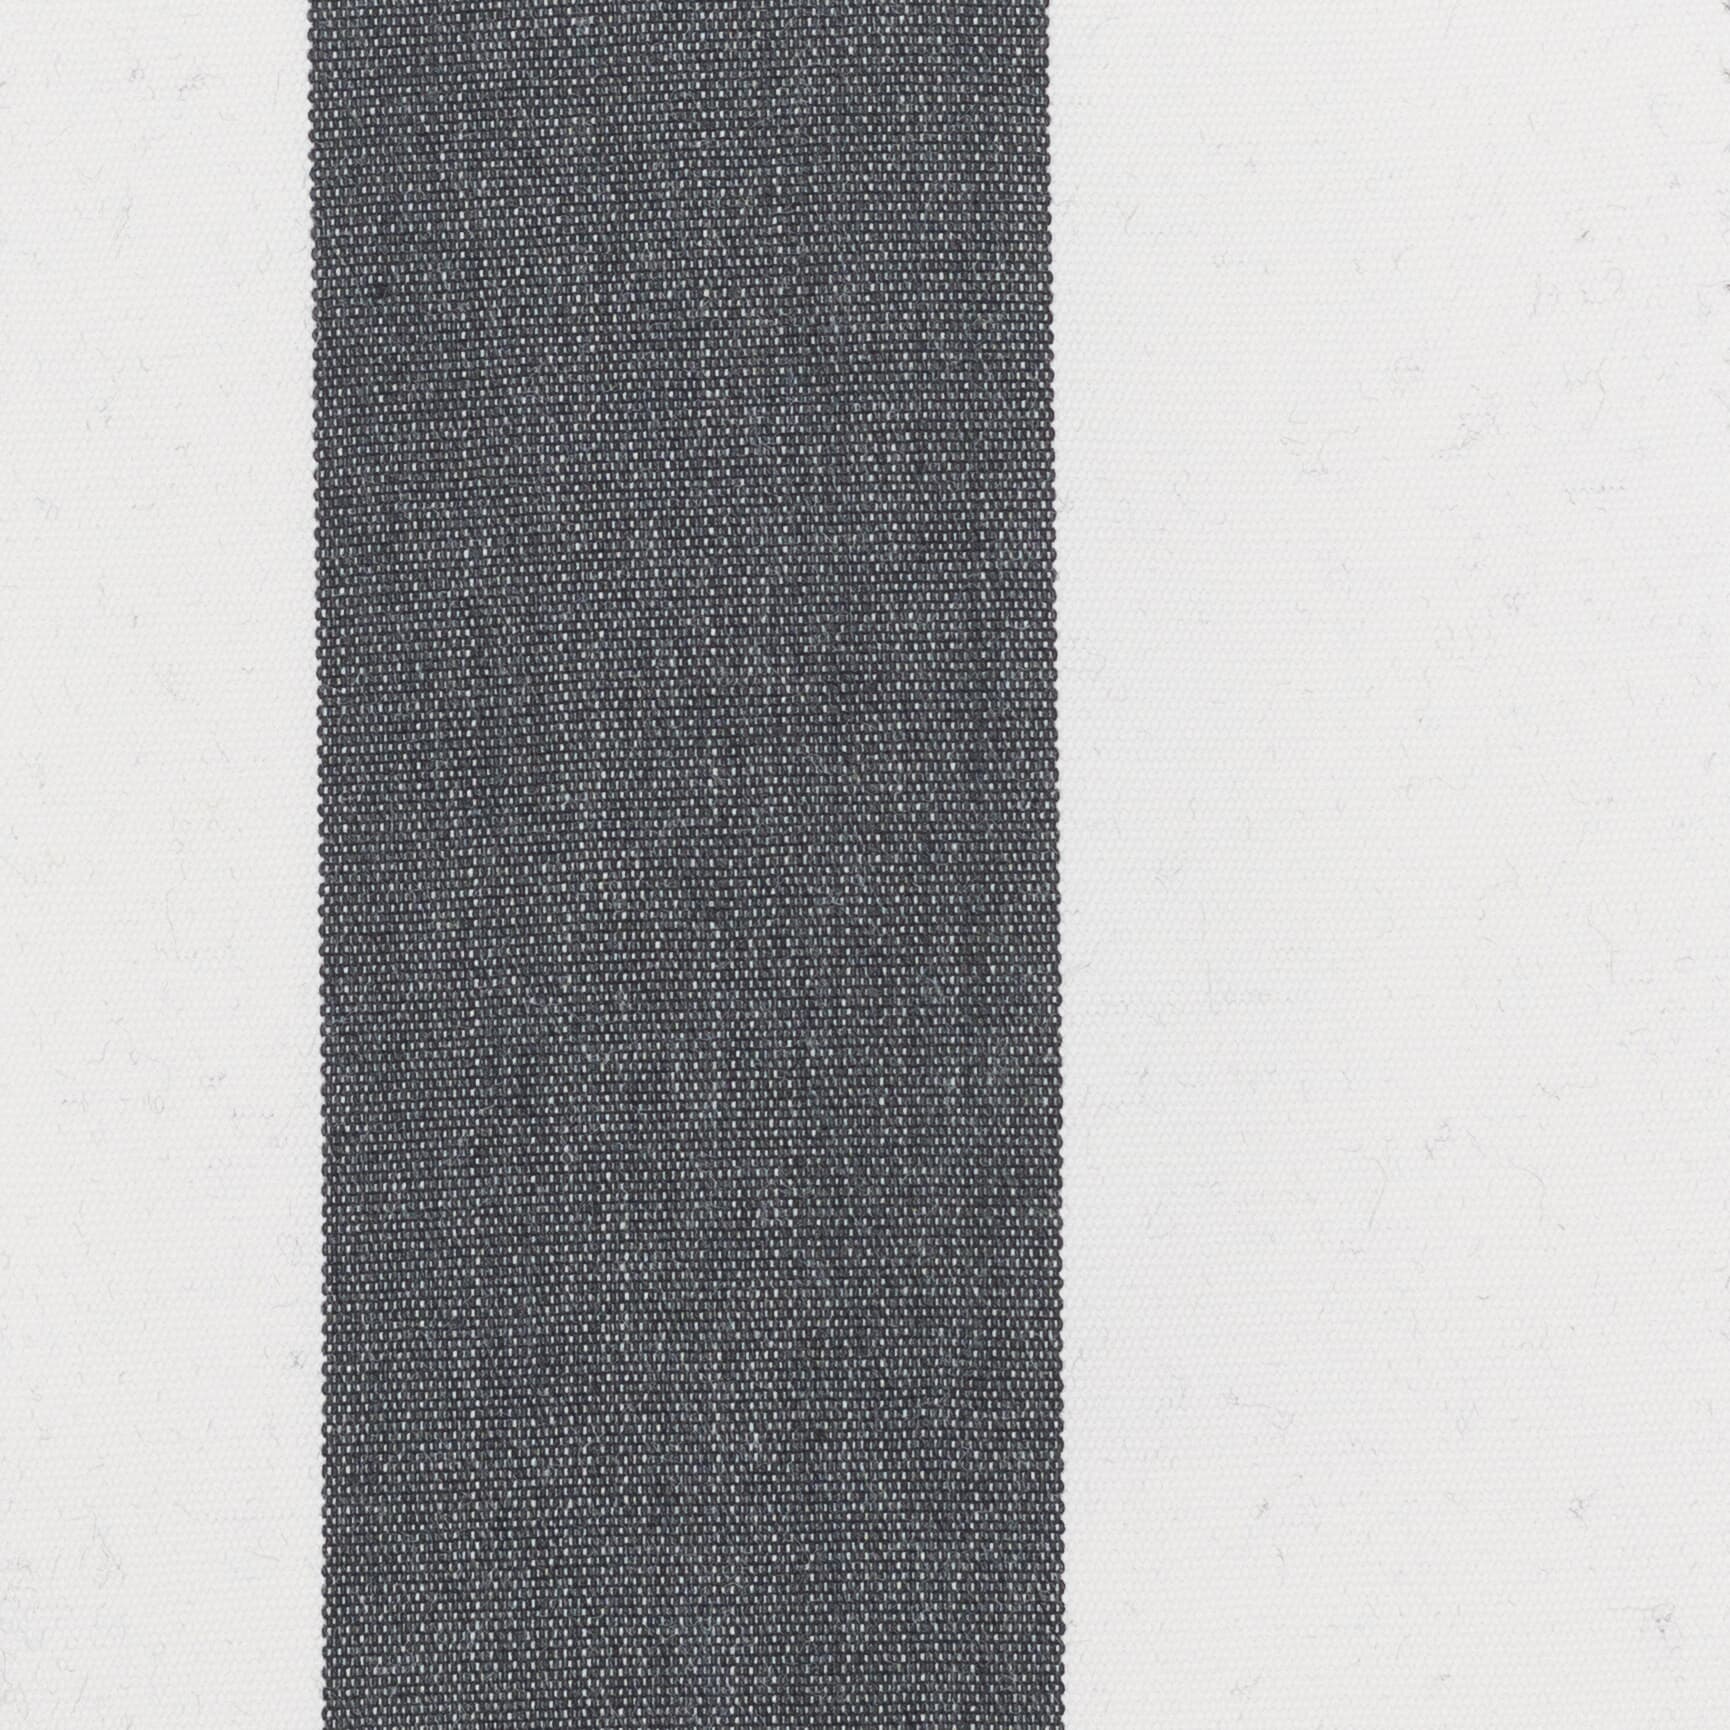 Patmore 4 Black/white by Stout Fabric